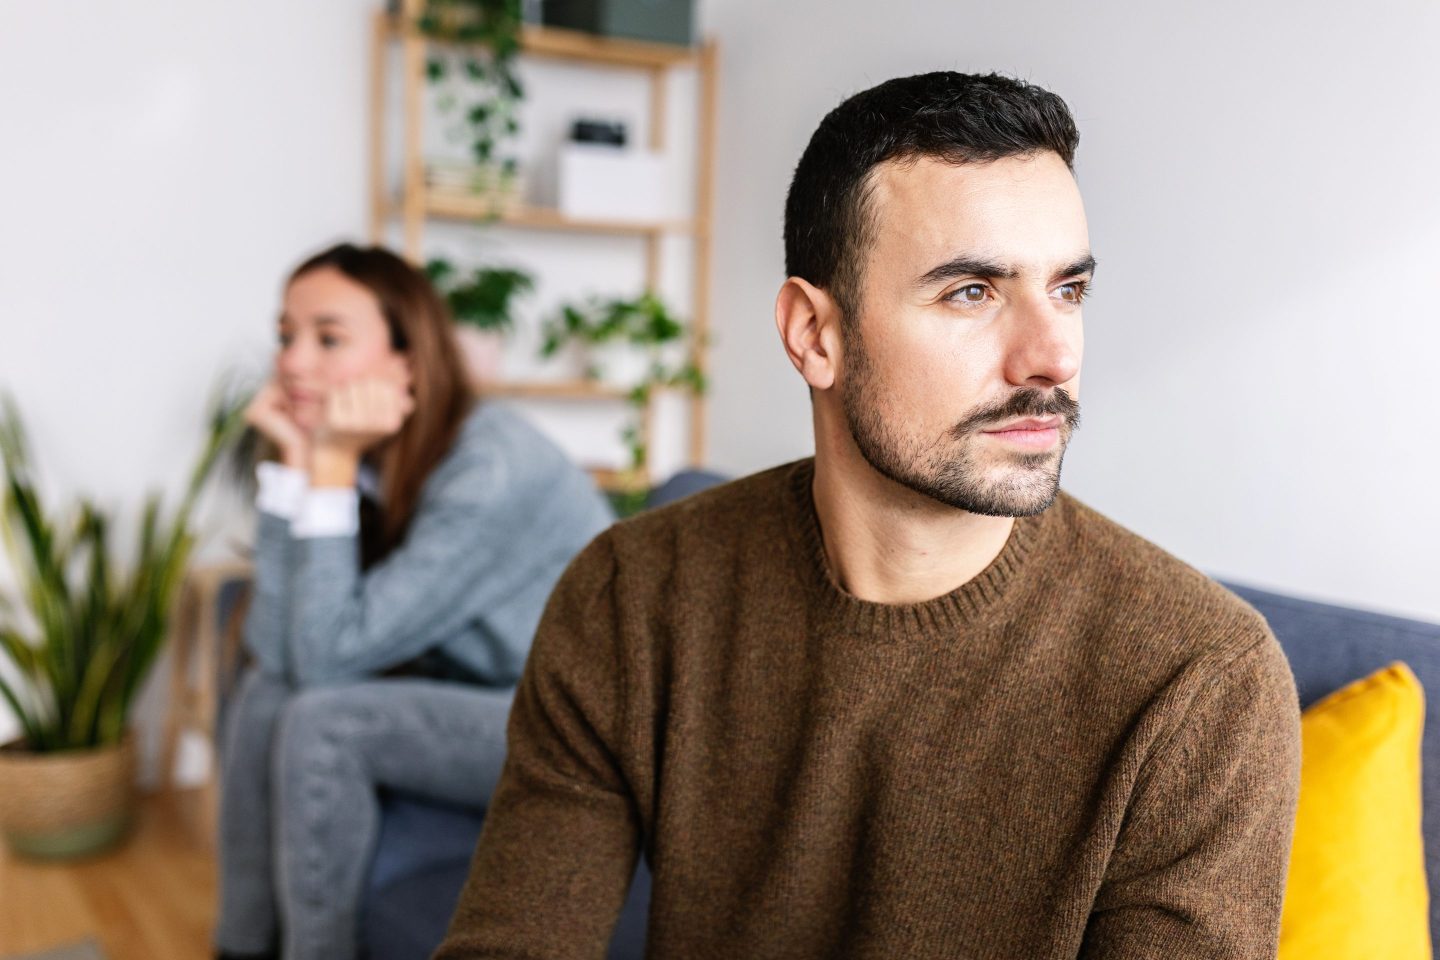 Young adult unhappy couple sitting distanced on sofa after arguing. Upset caucasian man looking annoyed away after having relationship problems with her girlfriend or wife.